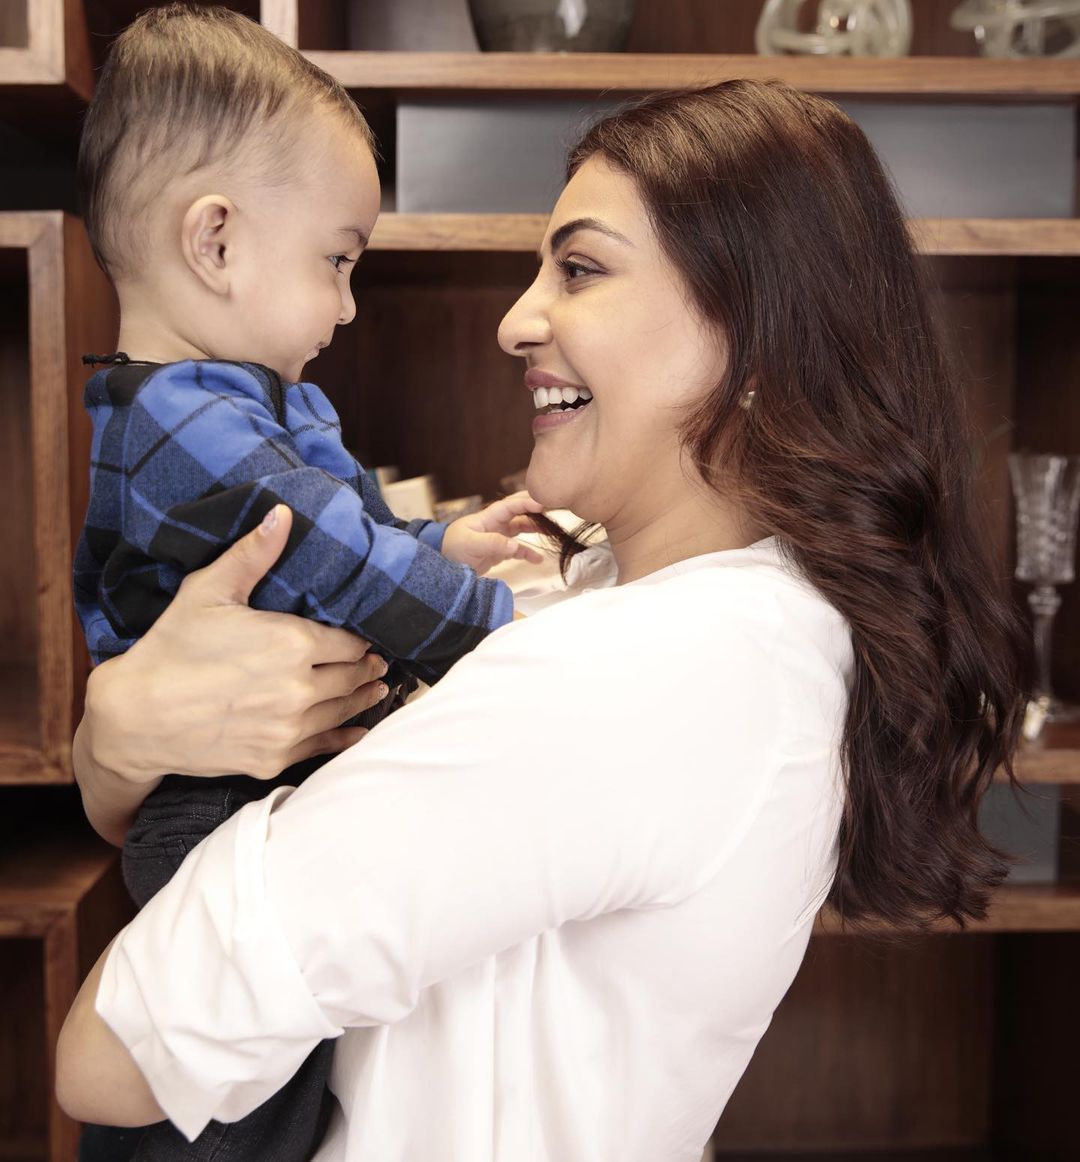 Kajal Aggarwal made son's special tableaux public, see adorable tableaux 11178